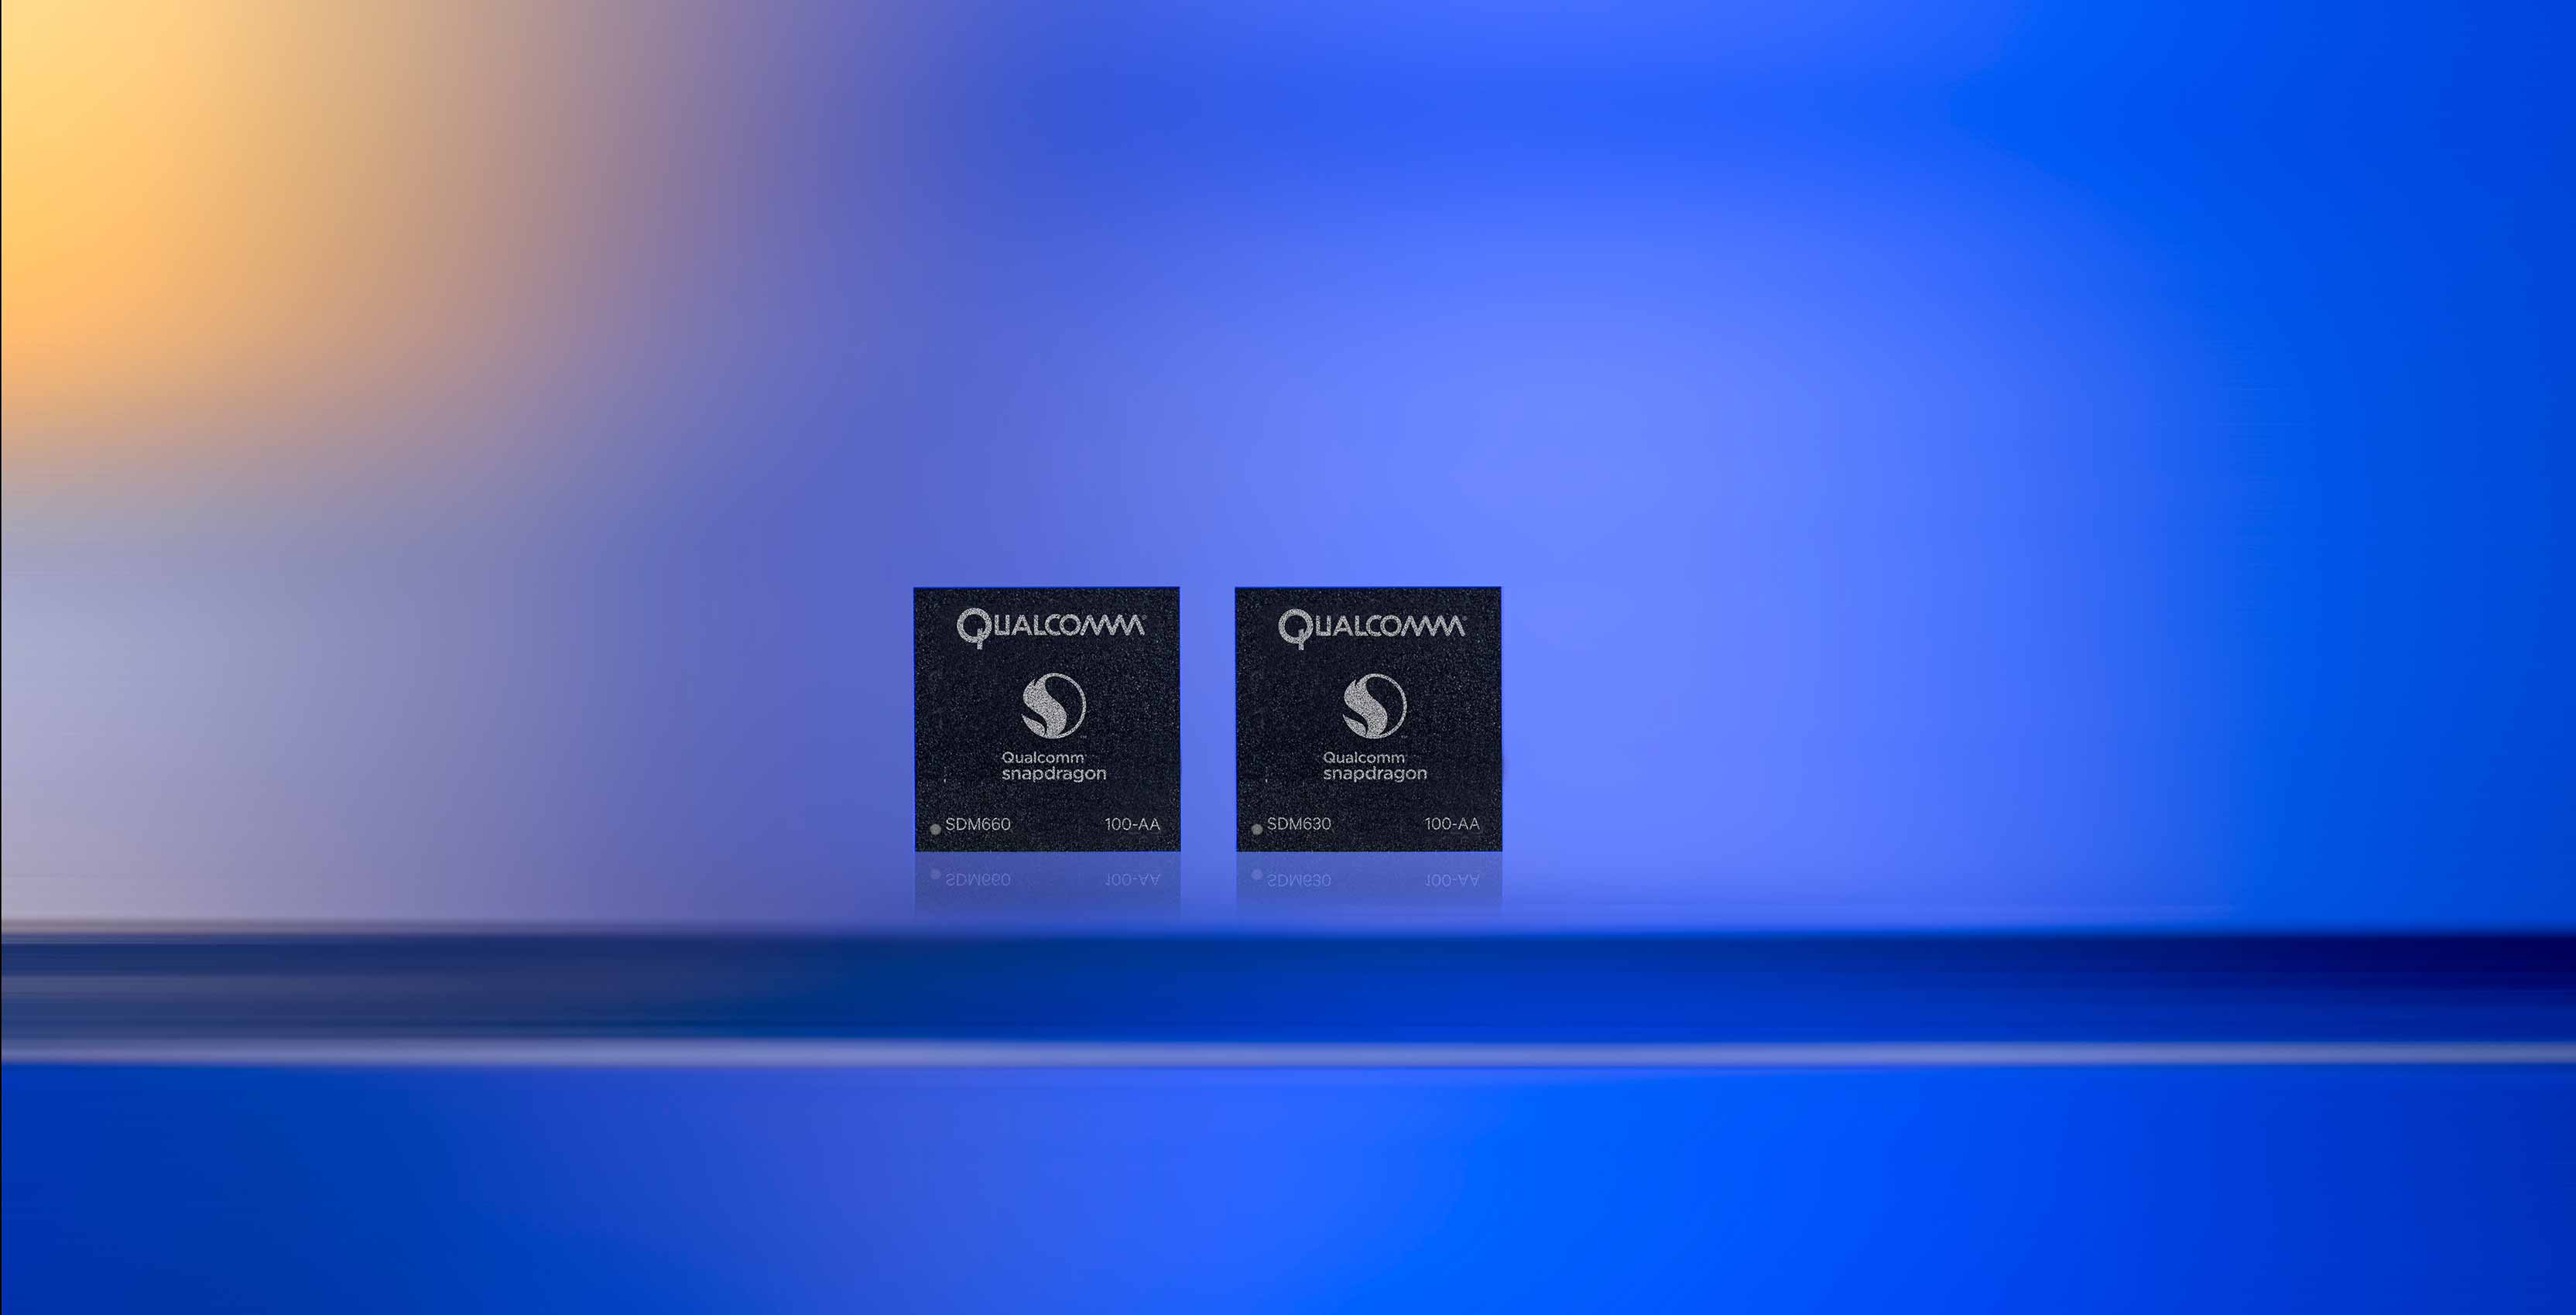 qualcomm snapdragon 630 and 660